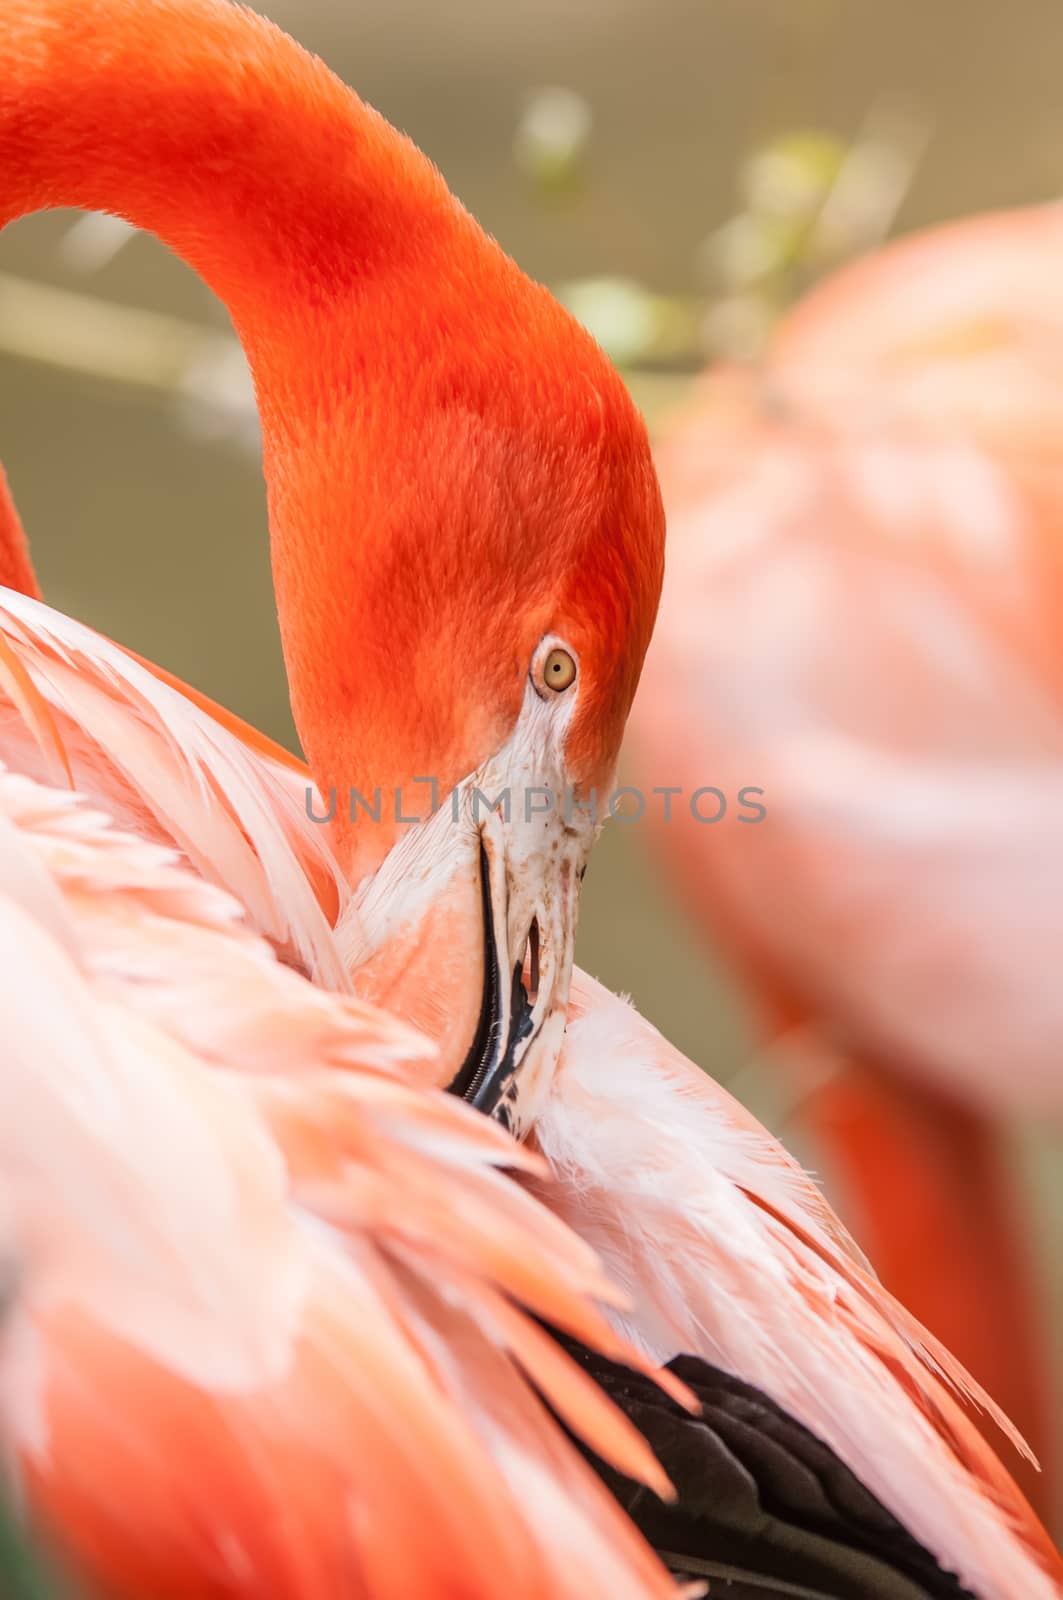 pink flamingo at a zoo in spring by digidreamgrafix